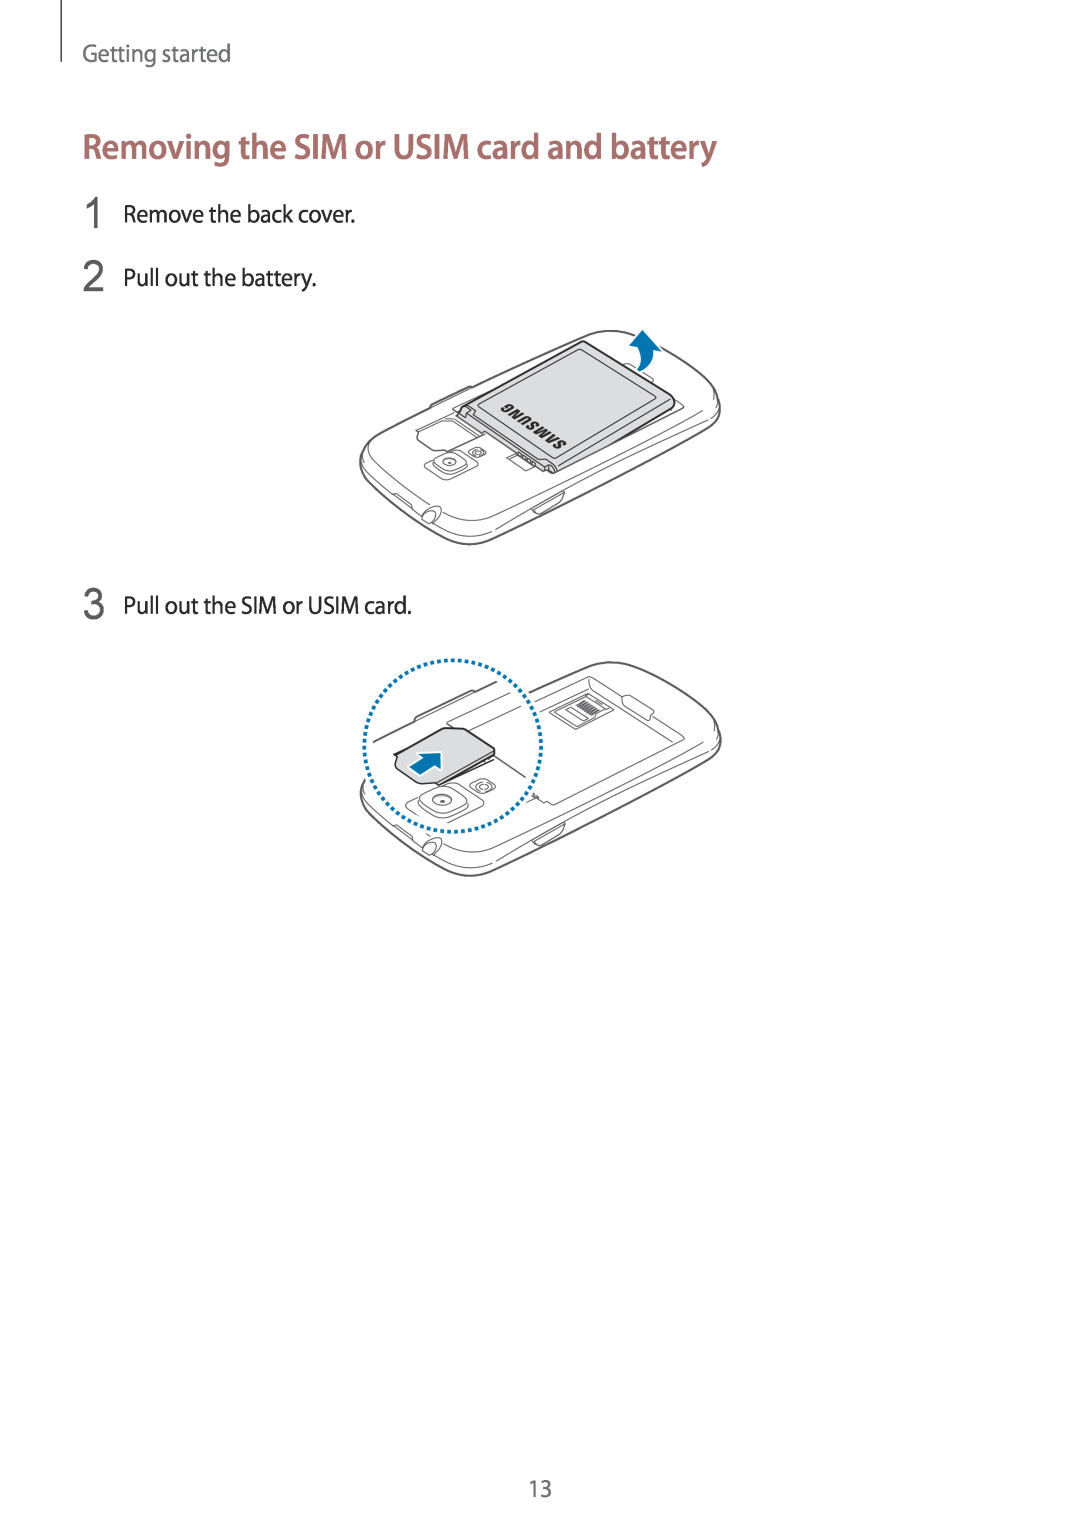 Samsung GT-I8190RWNNRJ manual Removing the SIM or USIM card and battery, Getting started, Pull out the SIM or USIM card 